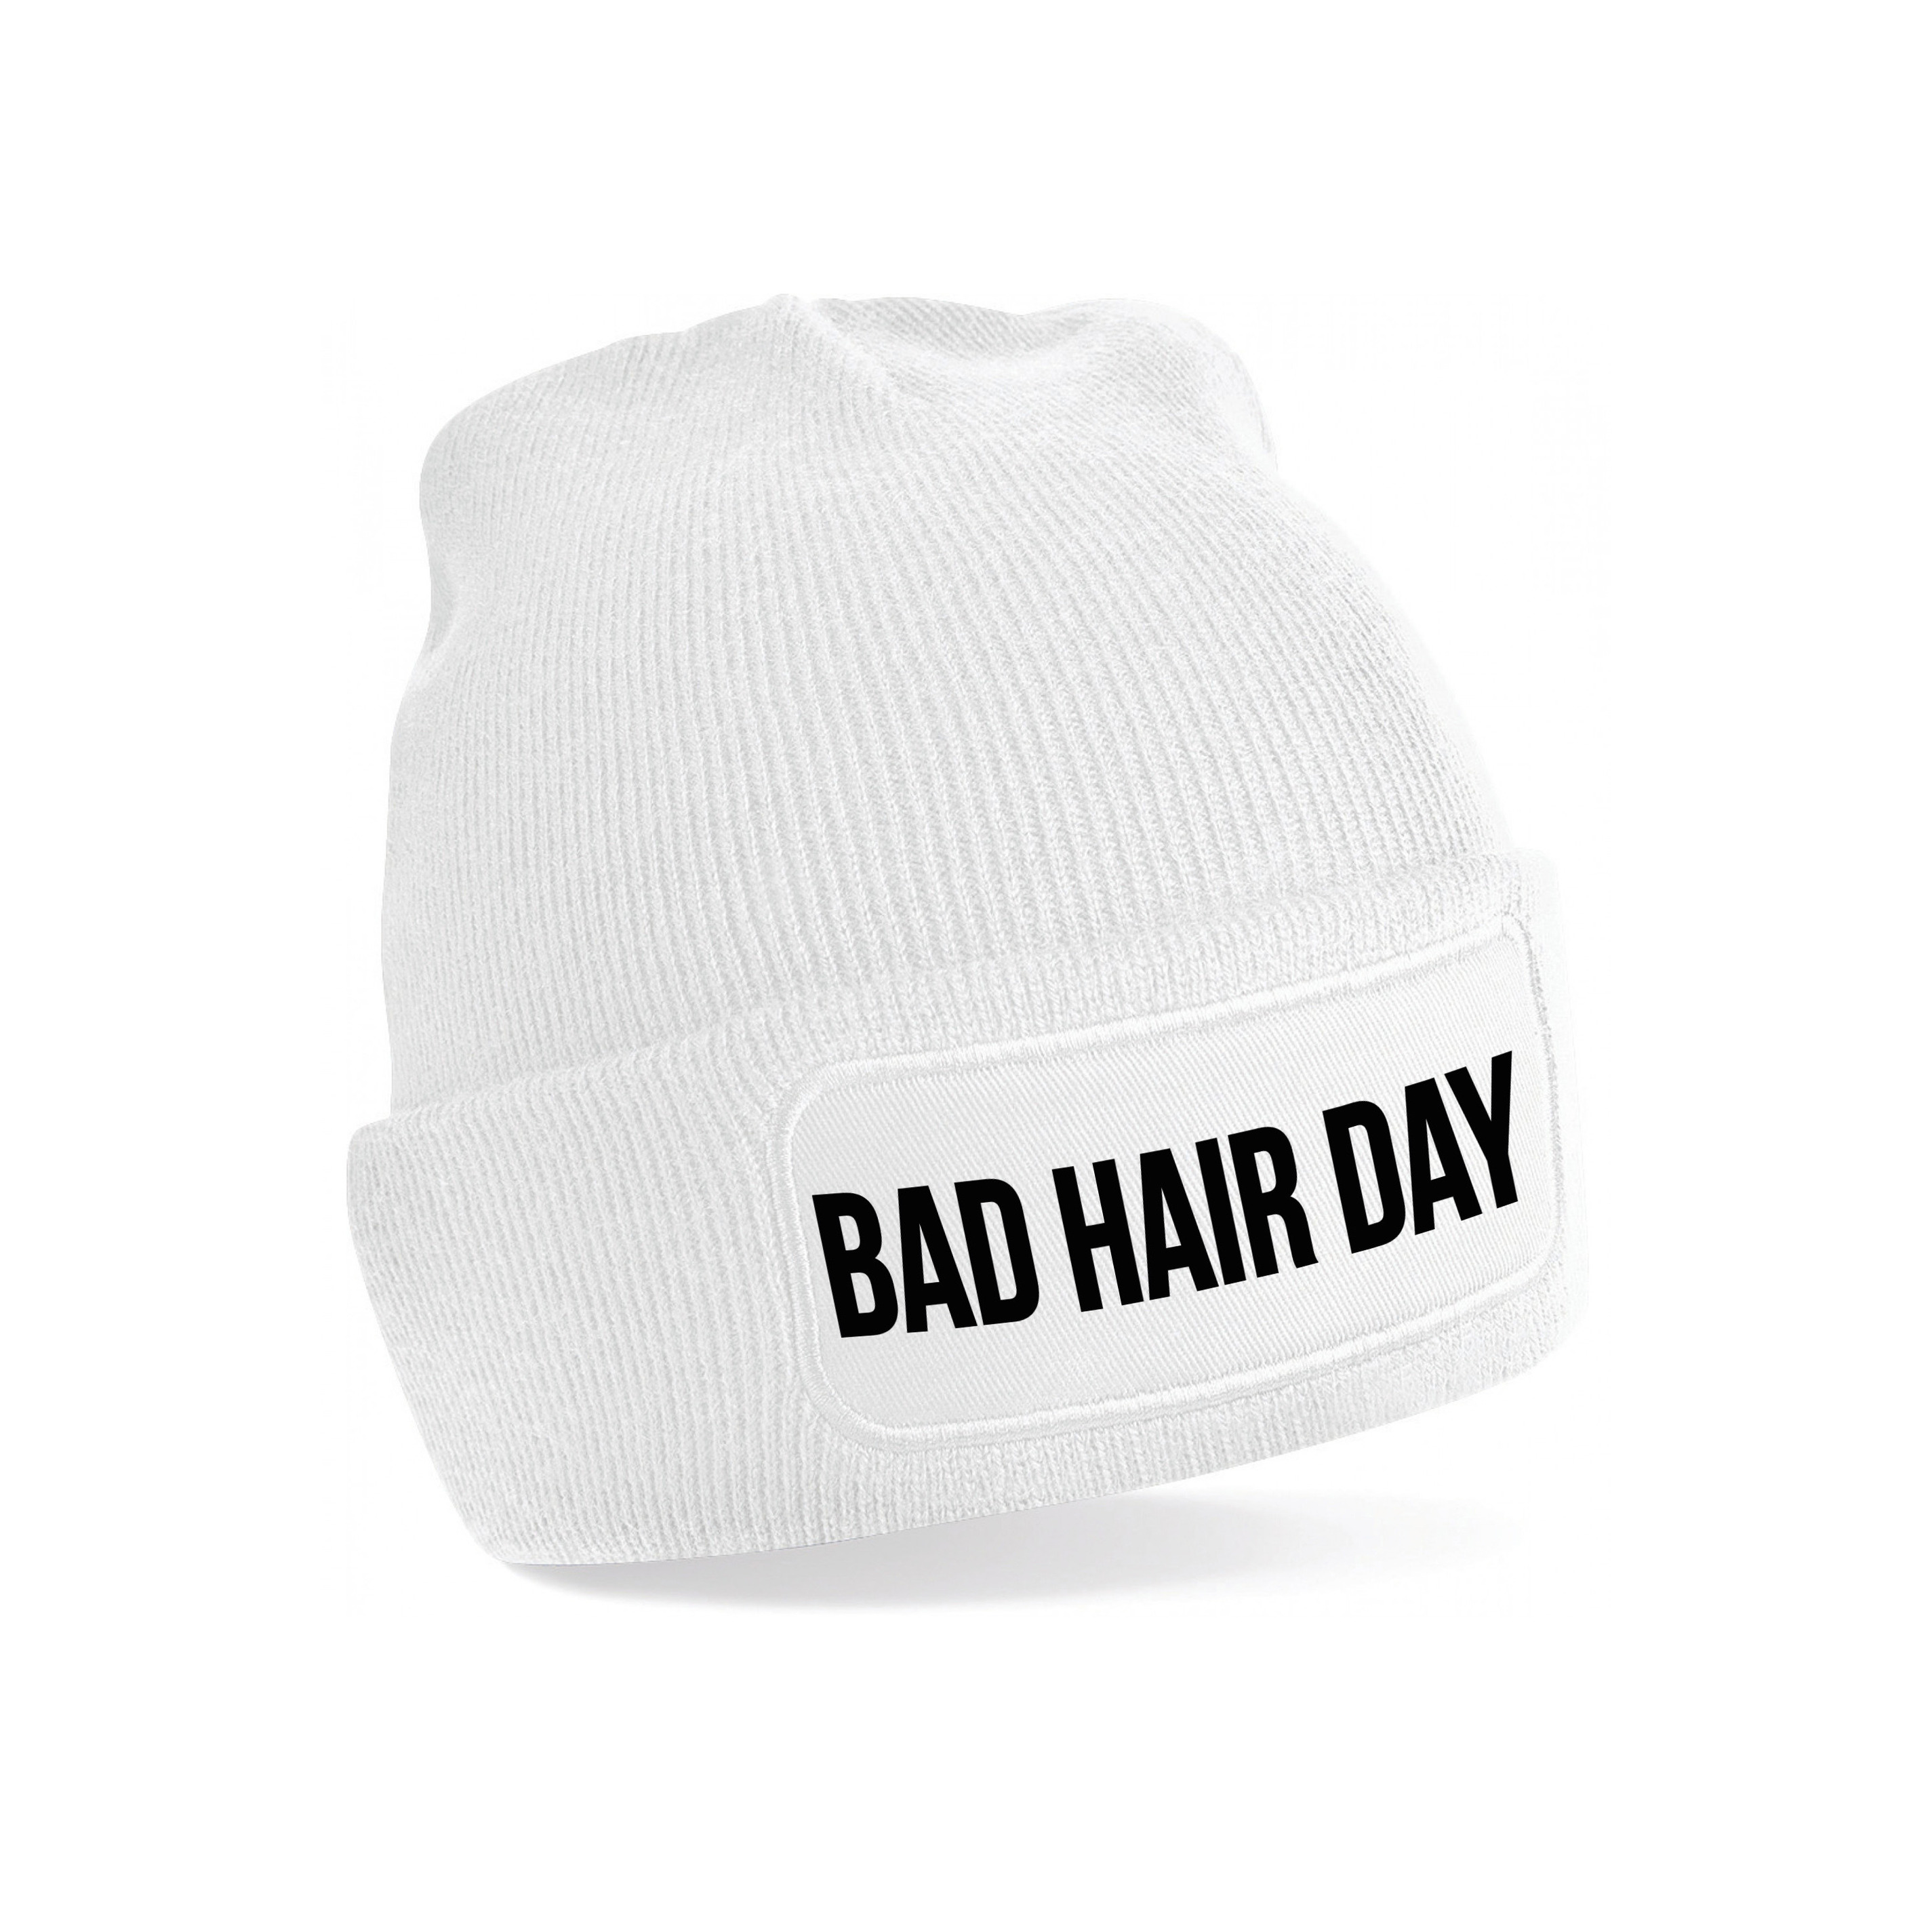 Bad hair day muts unisex one size Wit